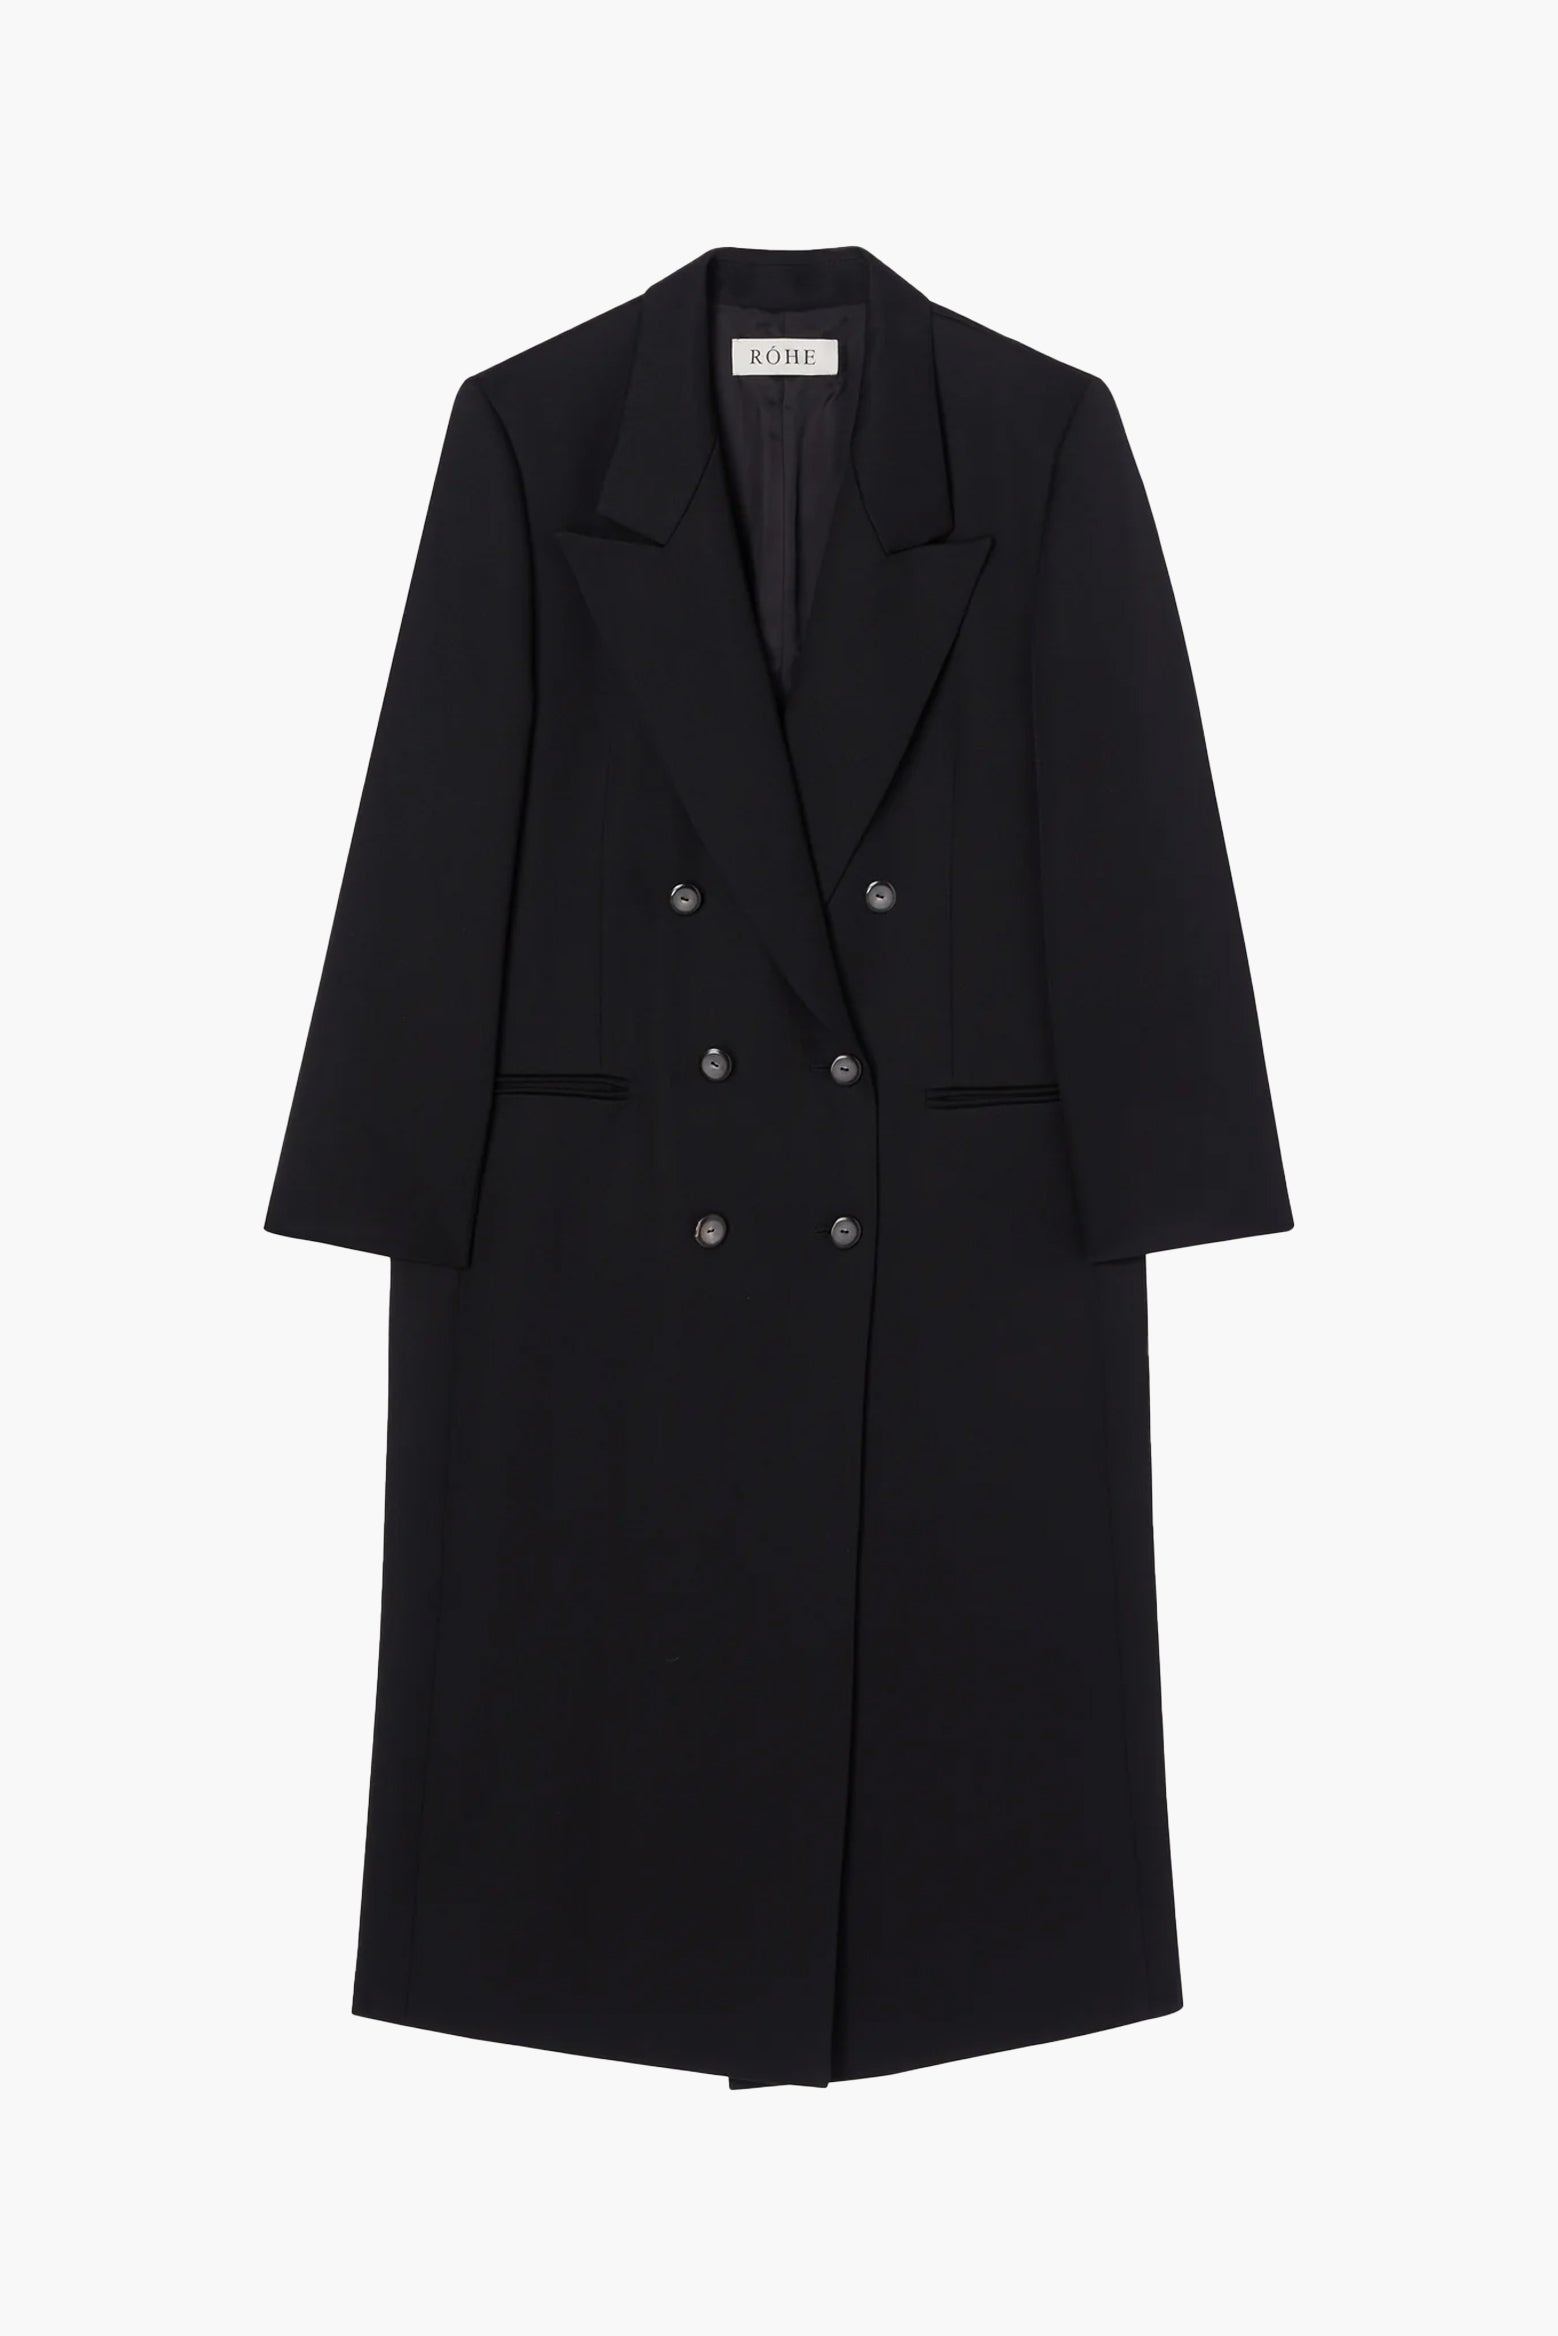 The Rohe Tailored Cap Coat in Noir available at The New Trend Australia